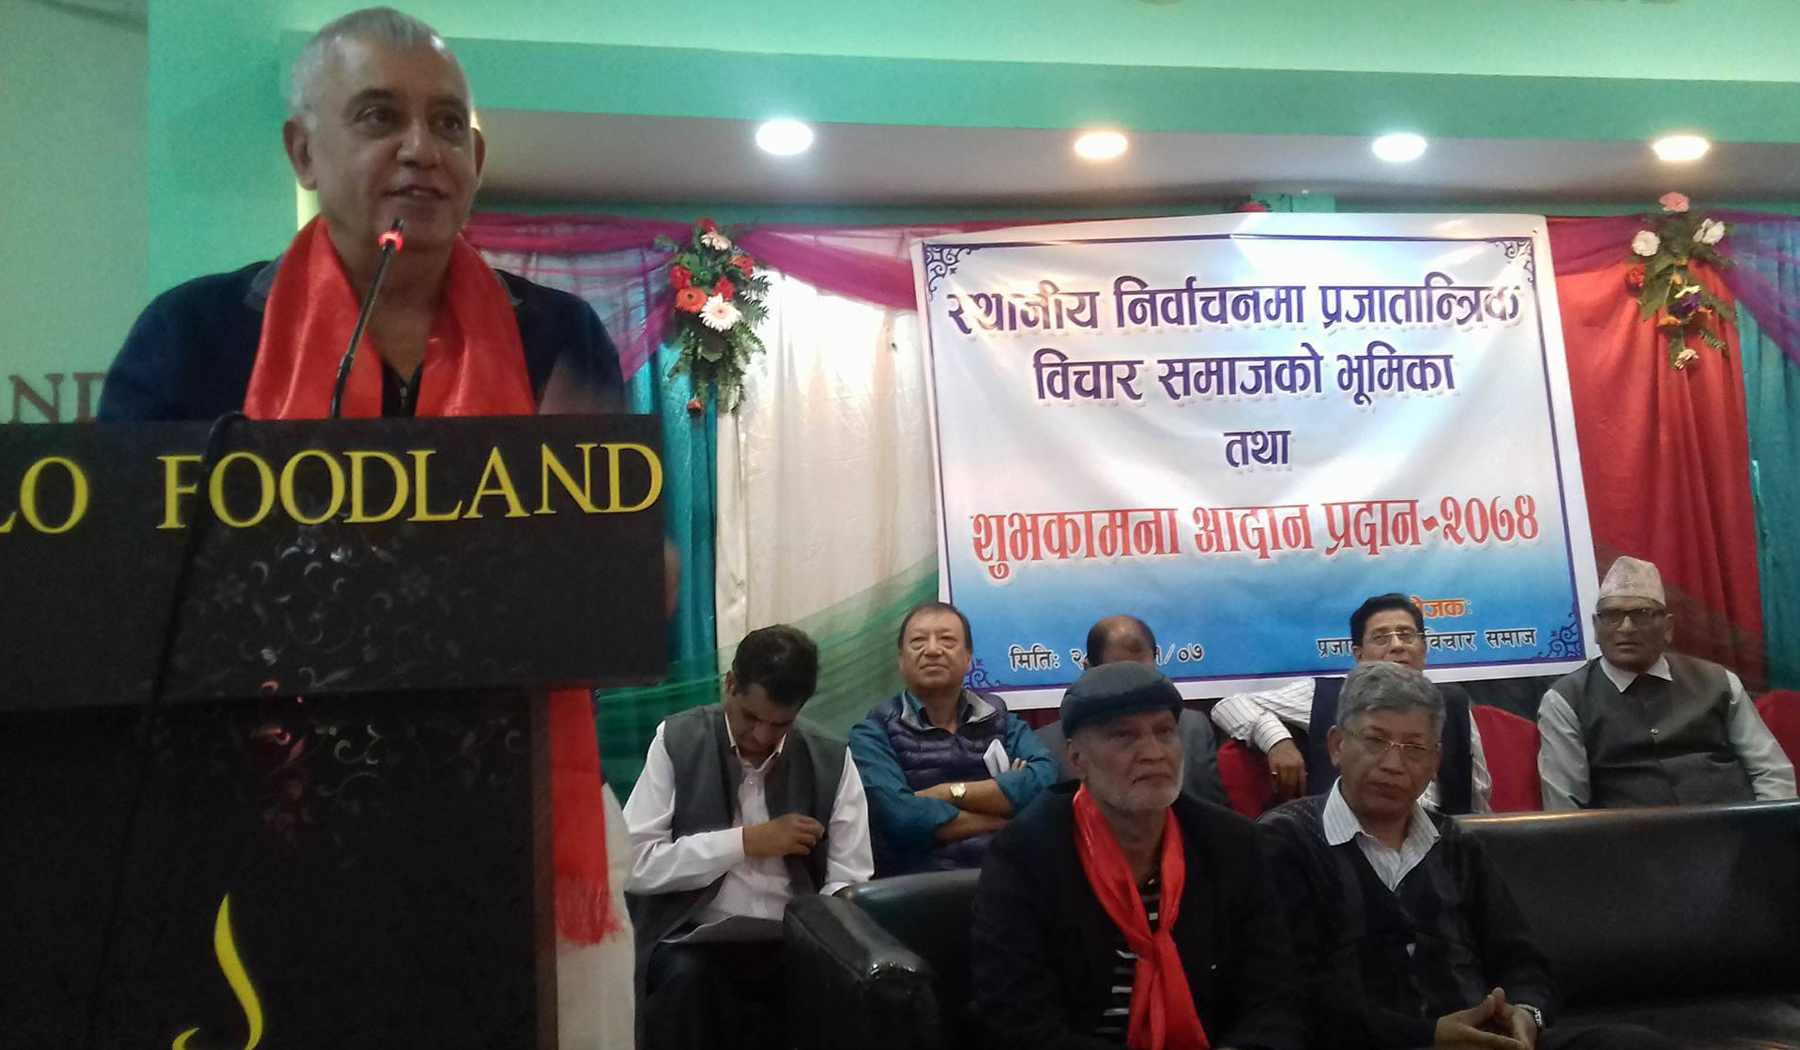 NC victory stressed to build 'prosperous Nepal'